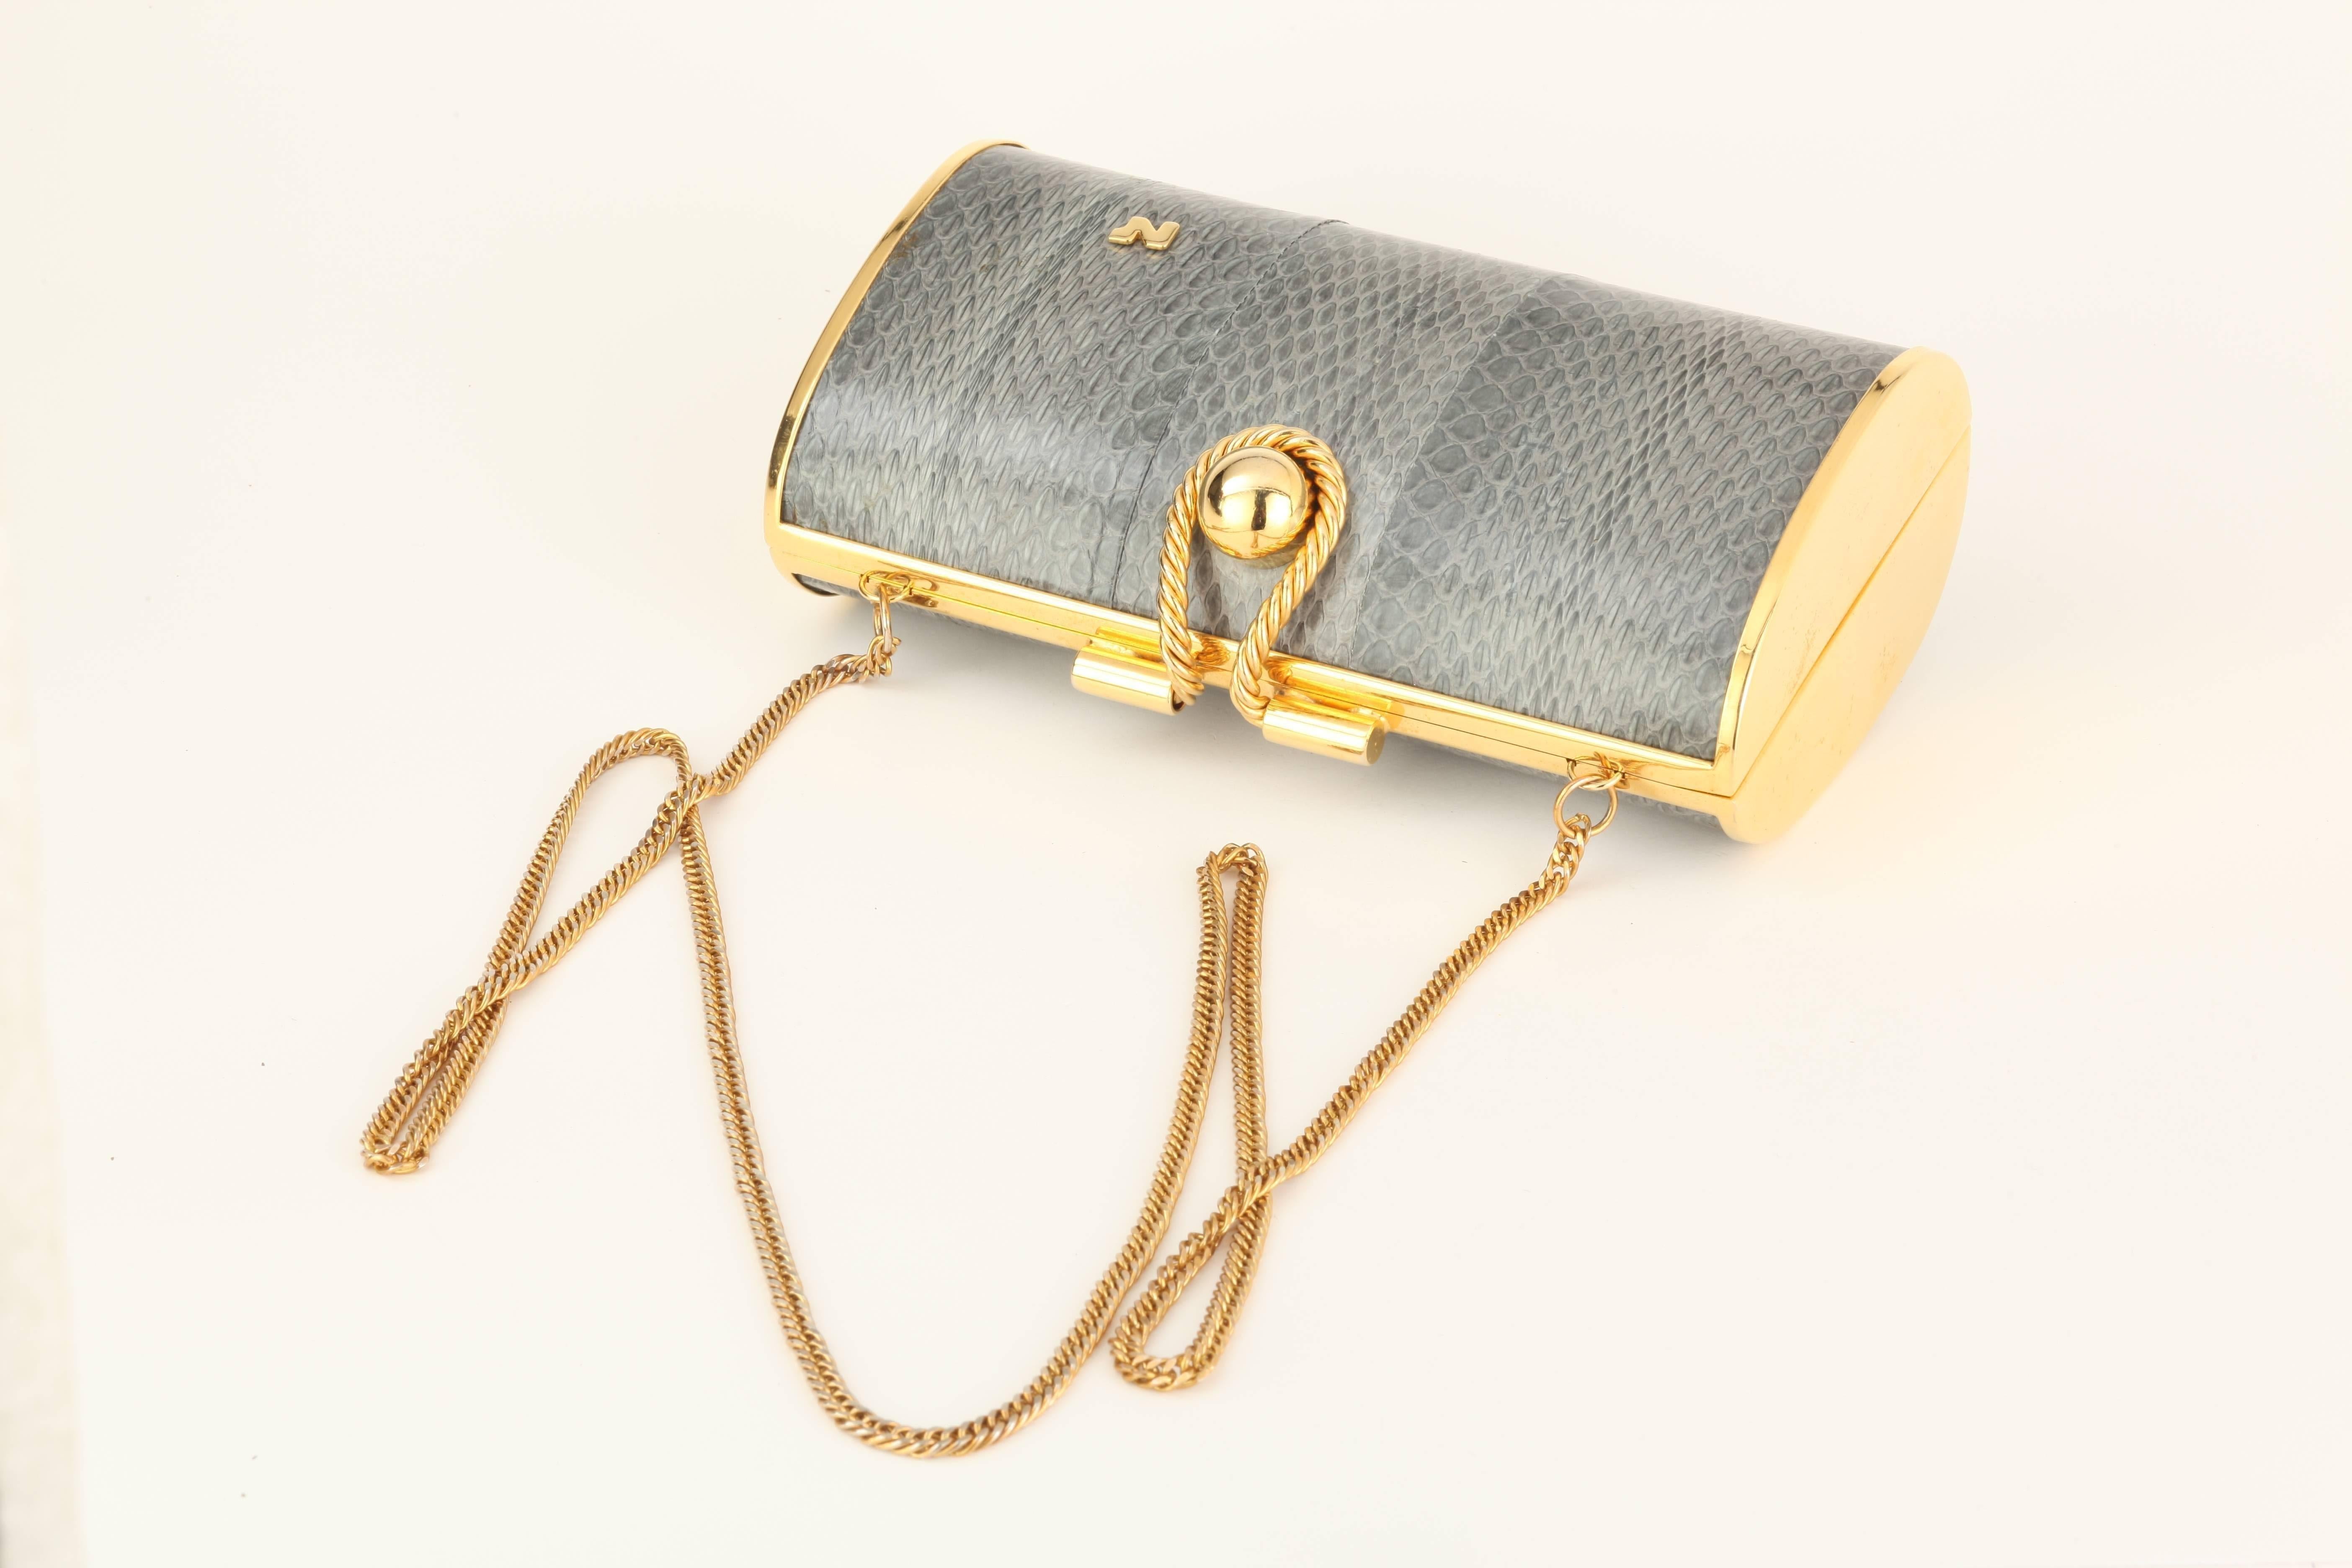 A beautiful present
Vintage unique 1970's Nina Ricci gold-tone and grey snake clutch with attached chain.
Measurements: W 7inch/18cm - H 5inch/13cm - D 2,5inch/7cm
Comes in the original packaging box. 